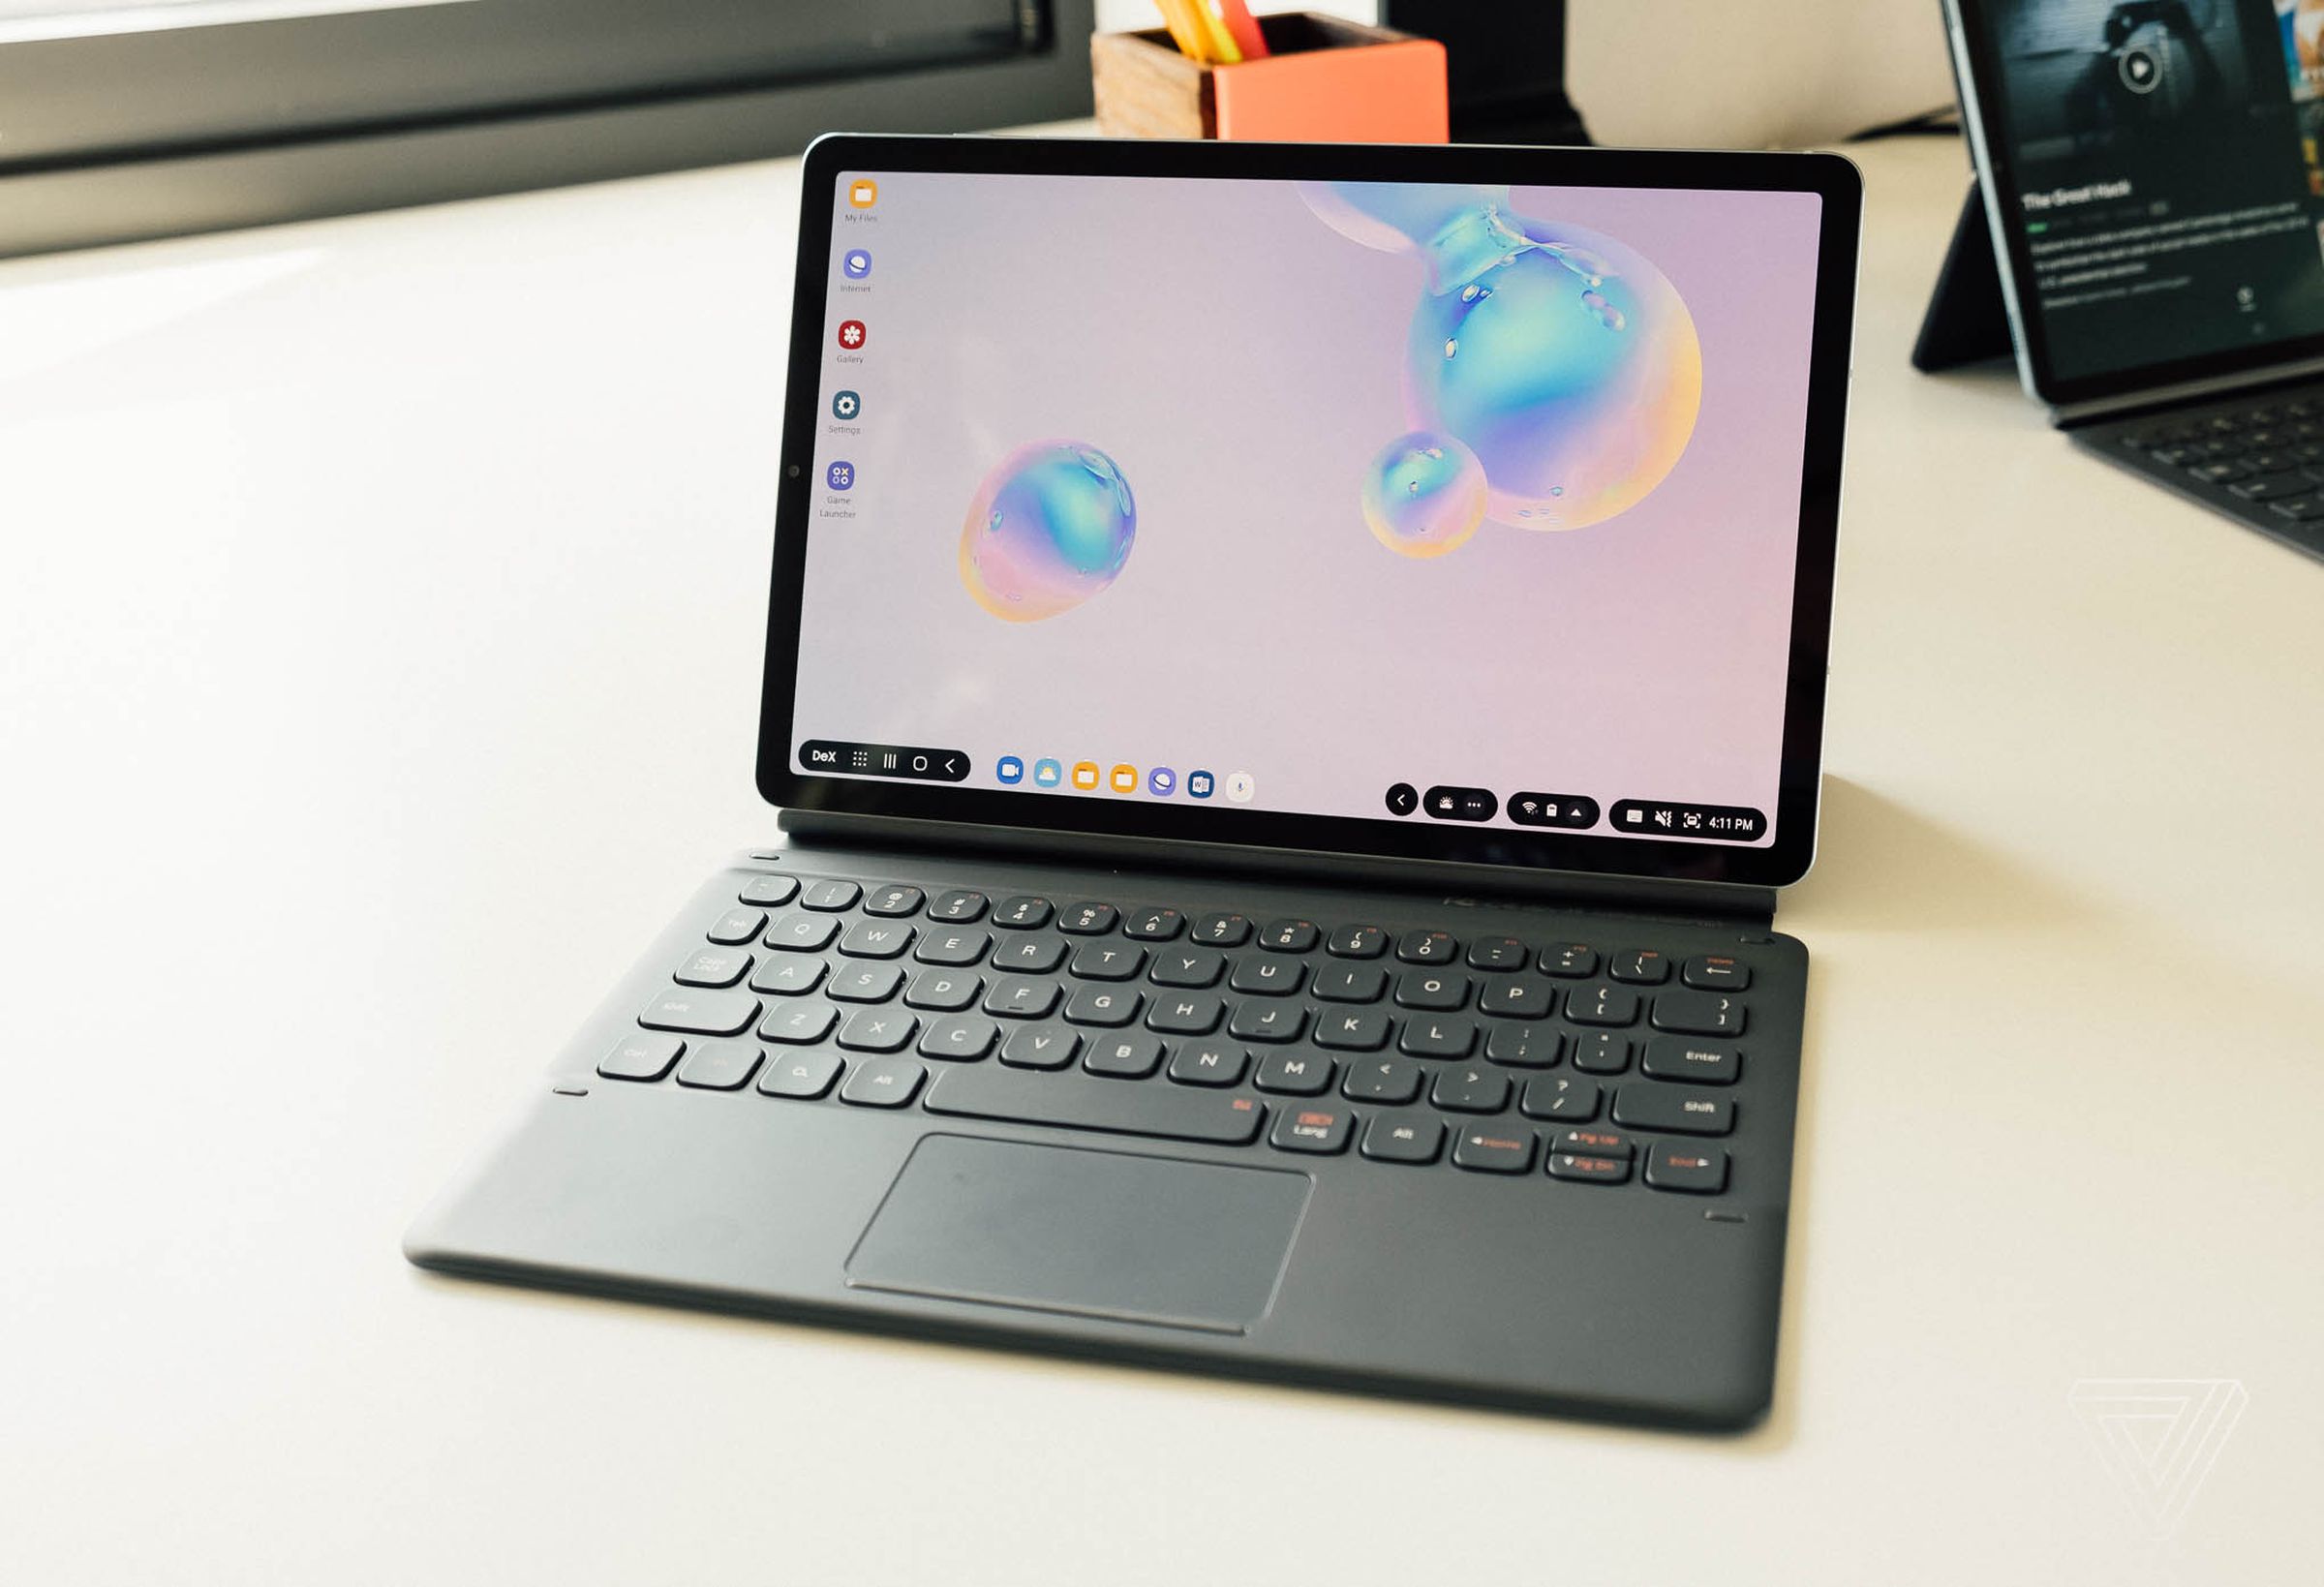 The Samsung Galaxy Tab S6 with its optional keyboard attached.